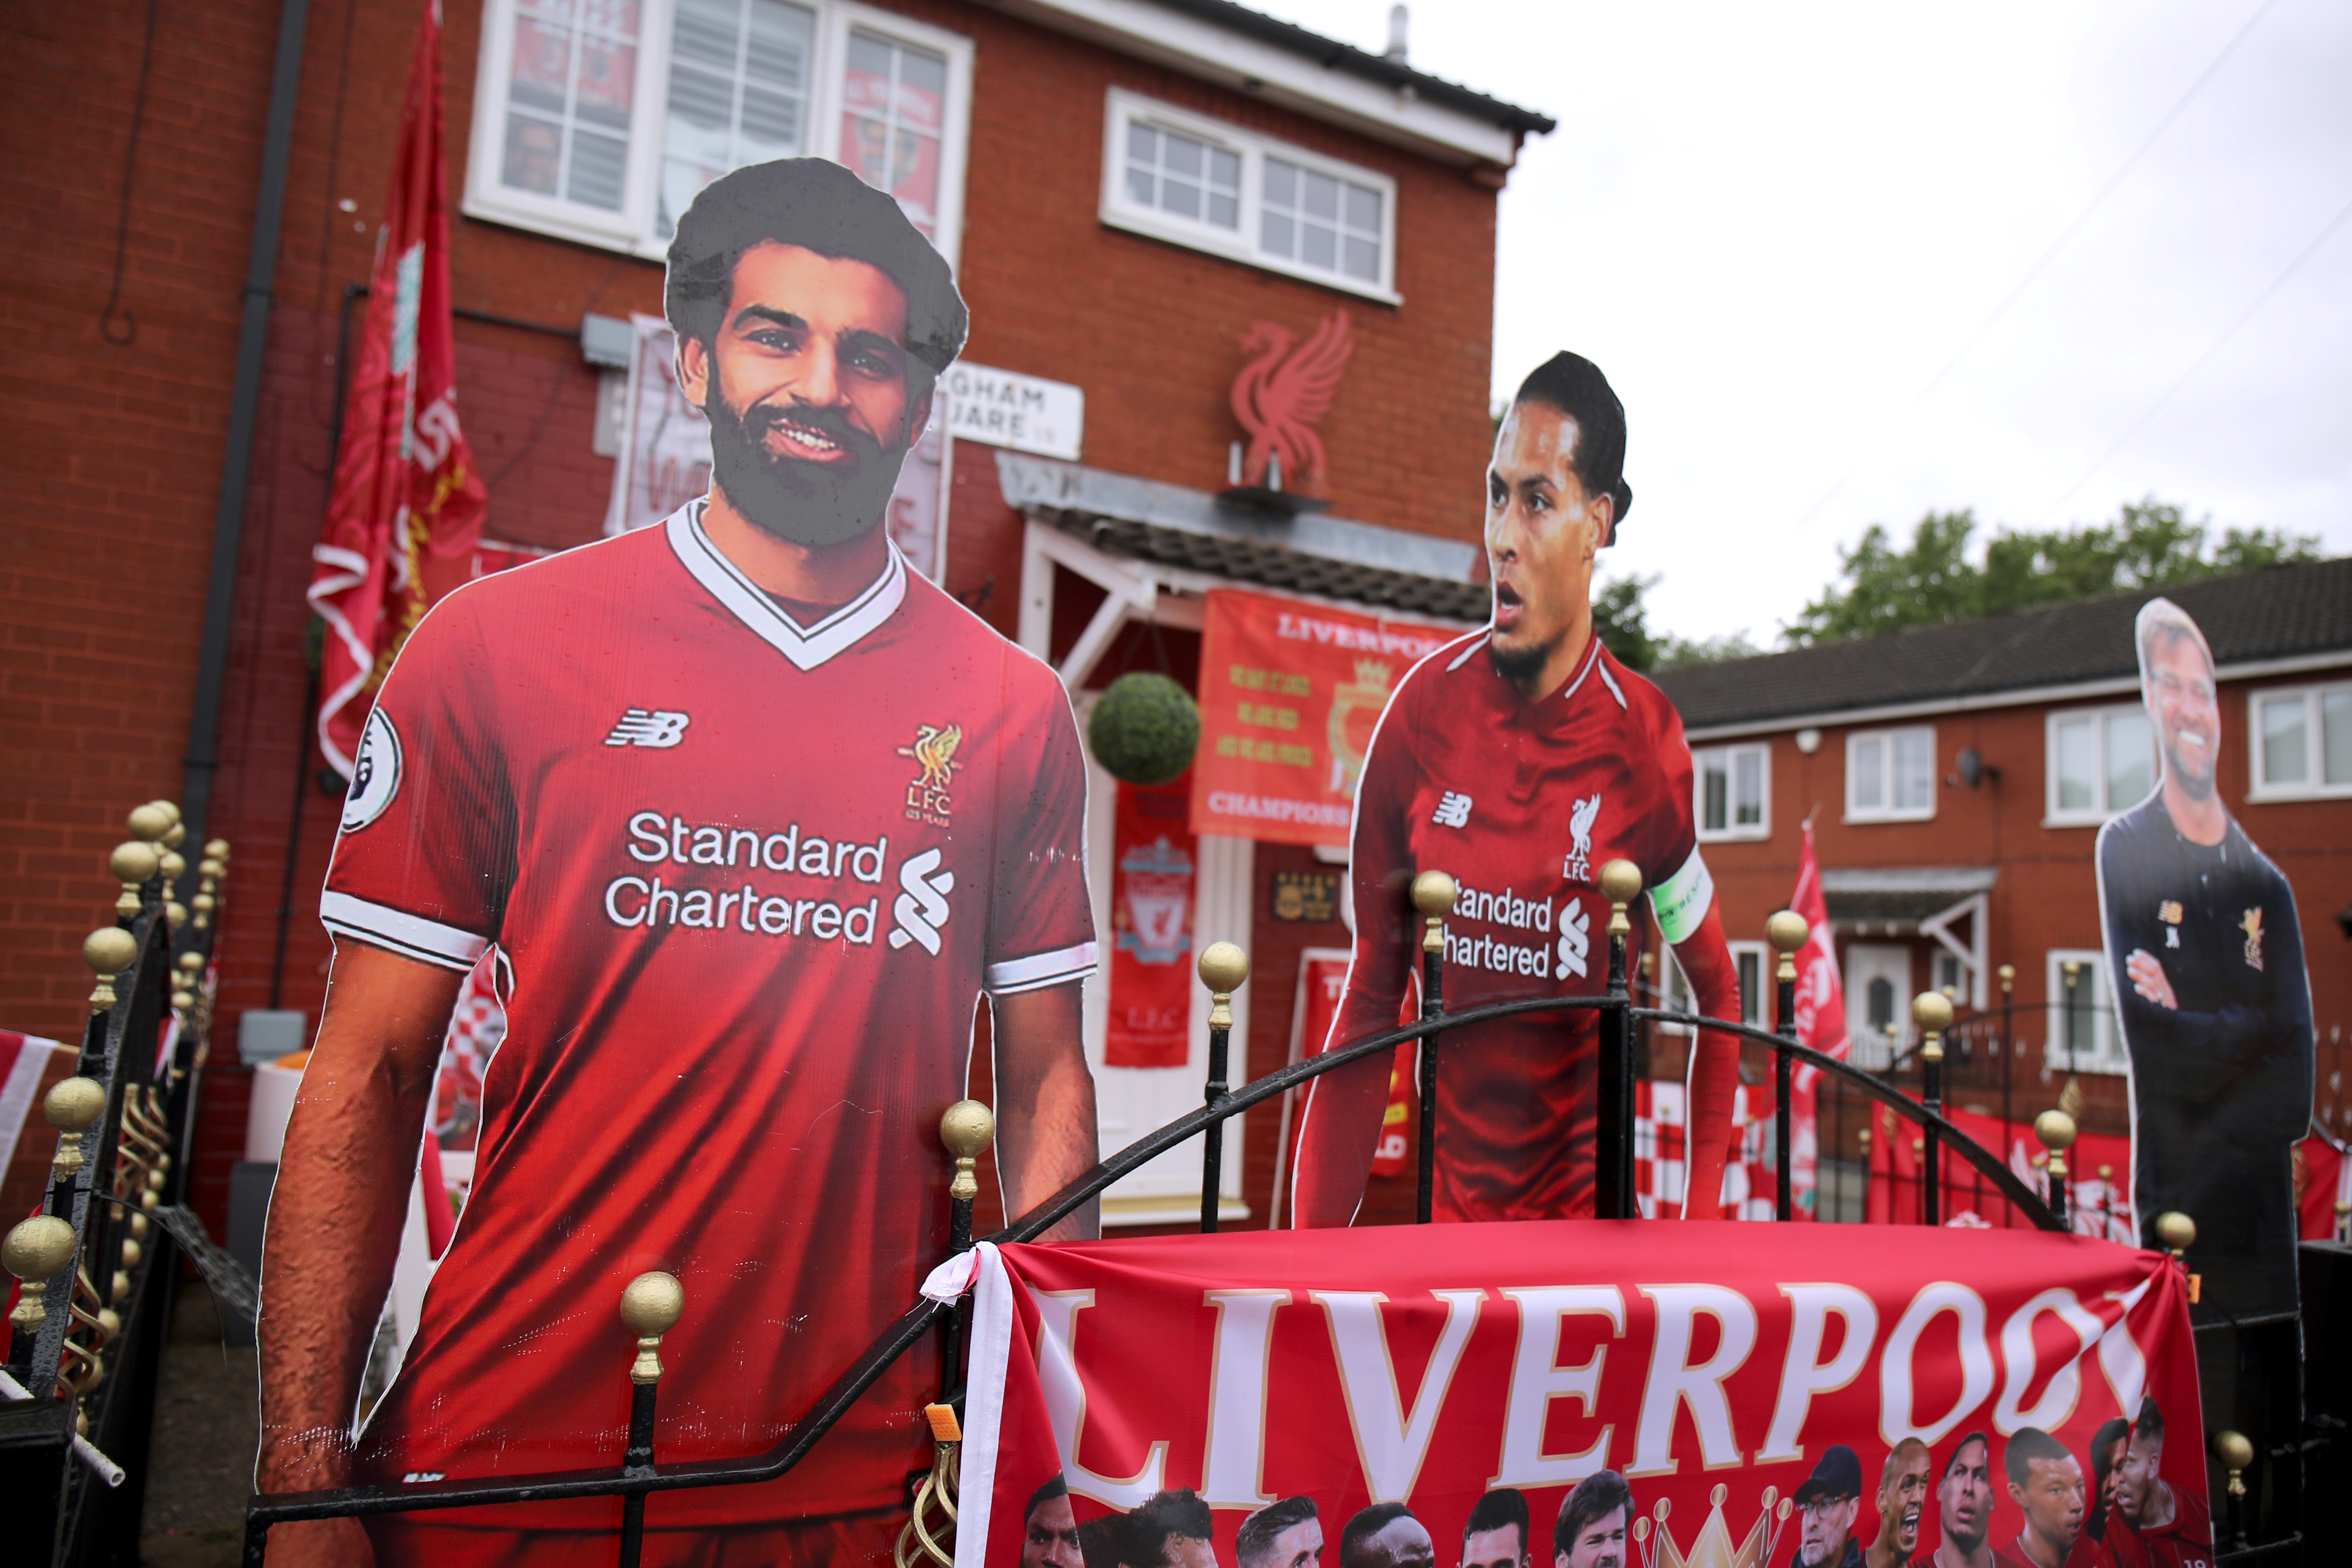 Soccer Football - Return of the Premier League - Everton v Liverpool Preview - Liverpool, Britain - June 19, 2020  Cutout photos of Liverpool's Mohamed Salah, Virgil van Dijk and Liverpool manager Juergen Klopp are seen outside the house of Emily Farley, who has decorated it in memory of her husband David ahead of the match.  Action Images via Reuters/Molly Darlington